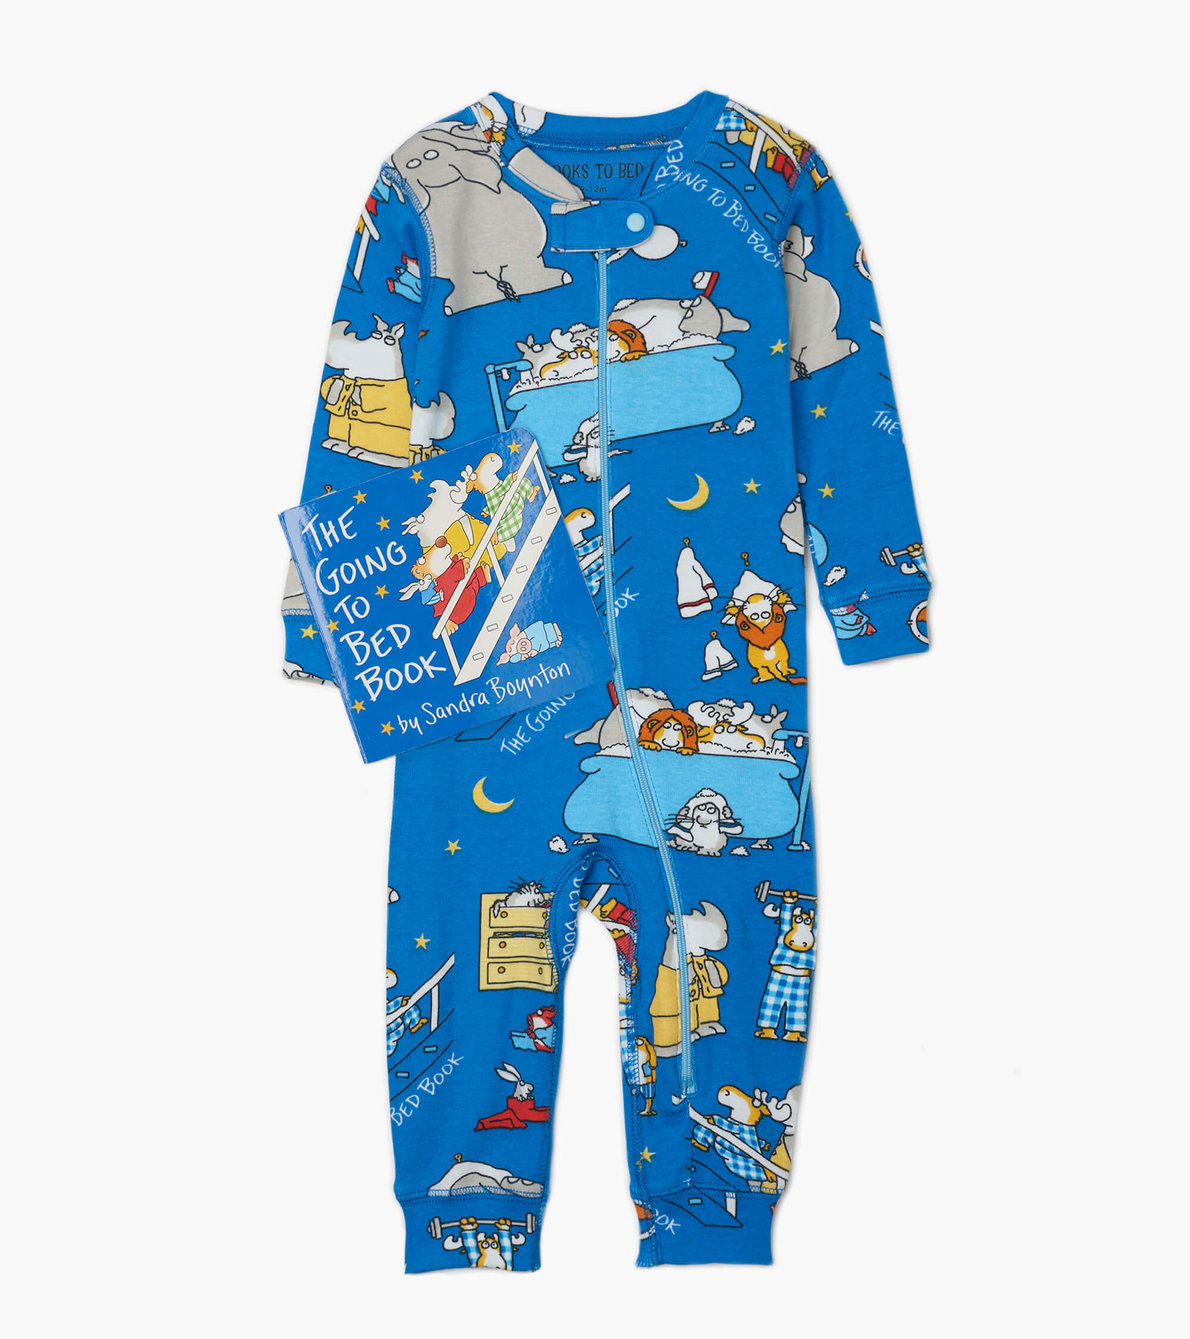 View larger image of Going to Bed Book and Infant Coverall